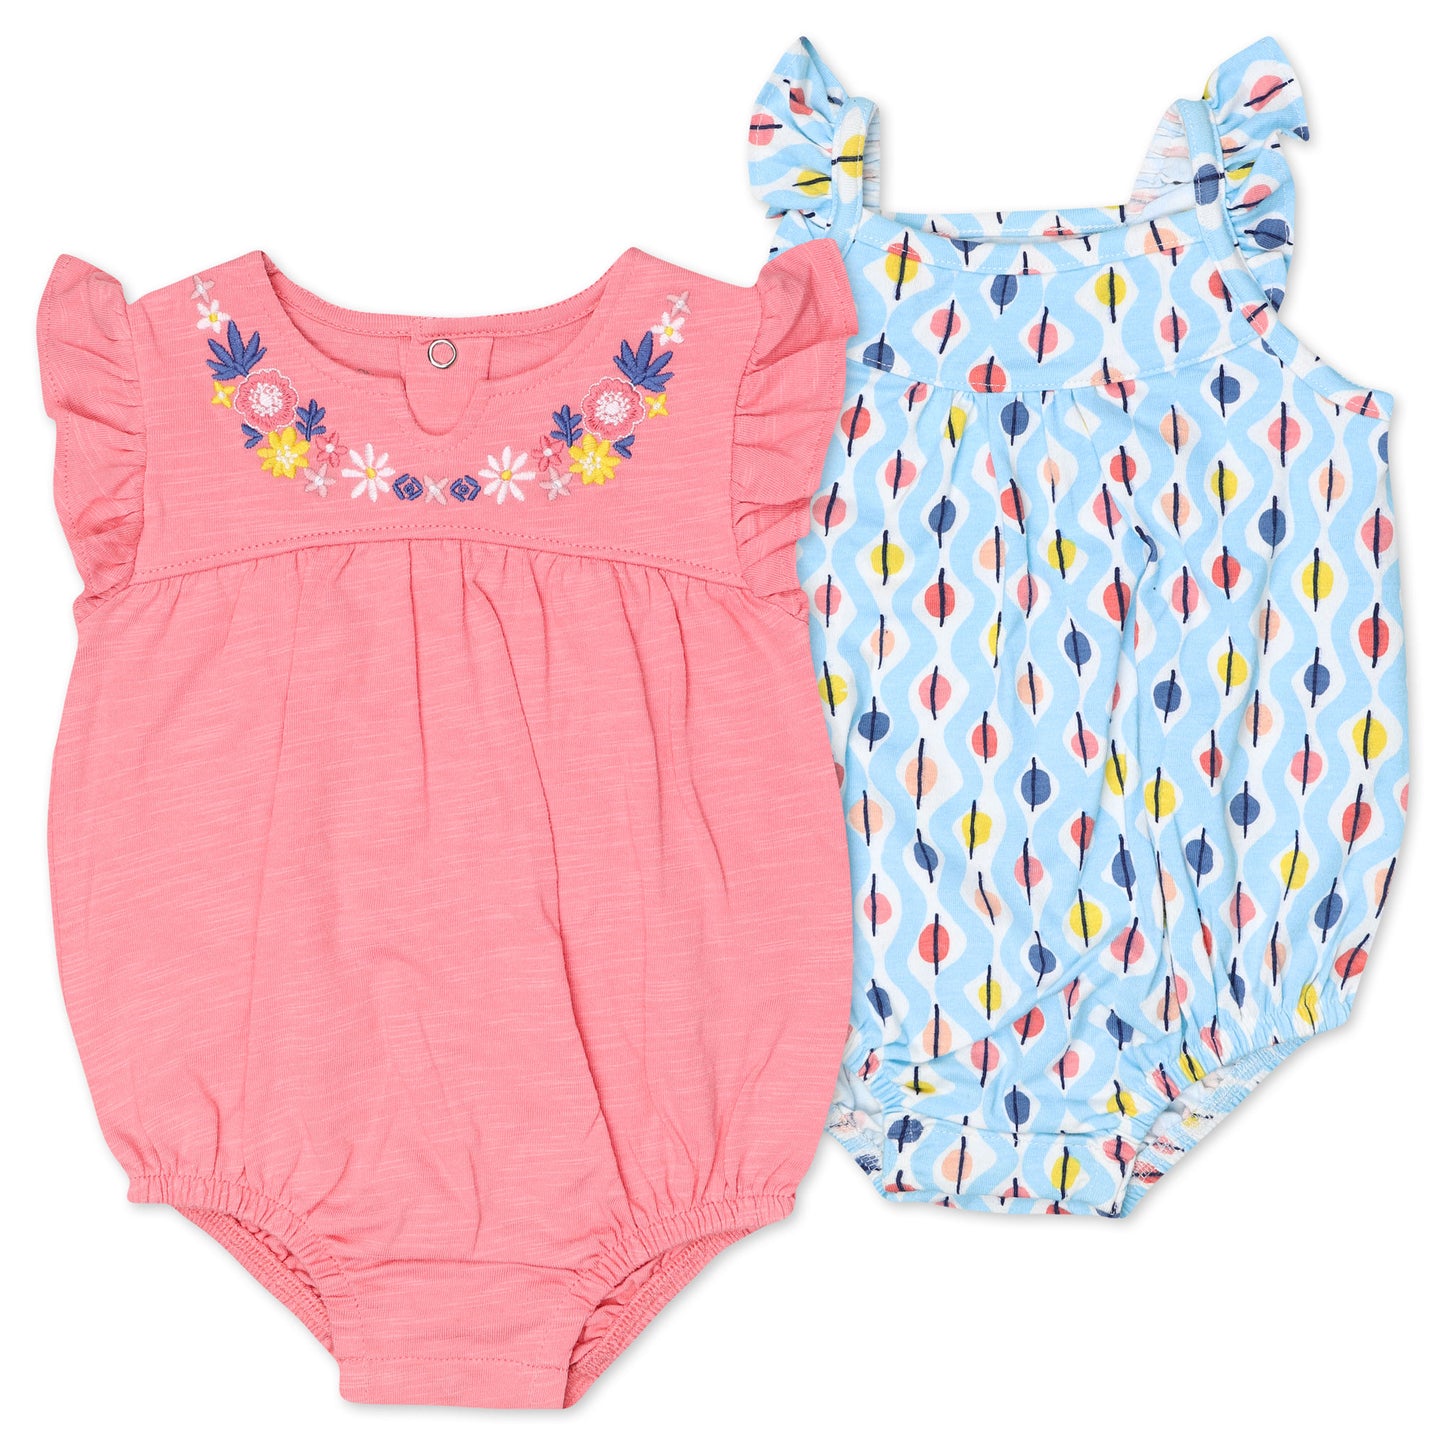 Organic Cotton 2-Pack Bubble Rompers in Elephant Blooms Print